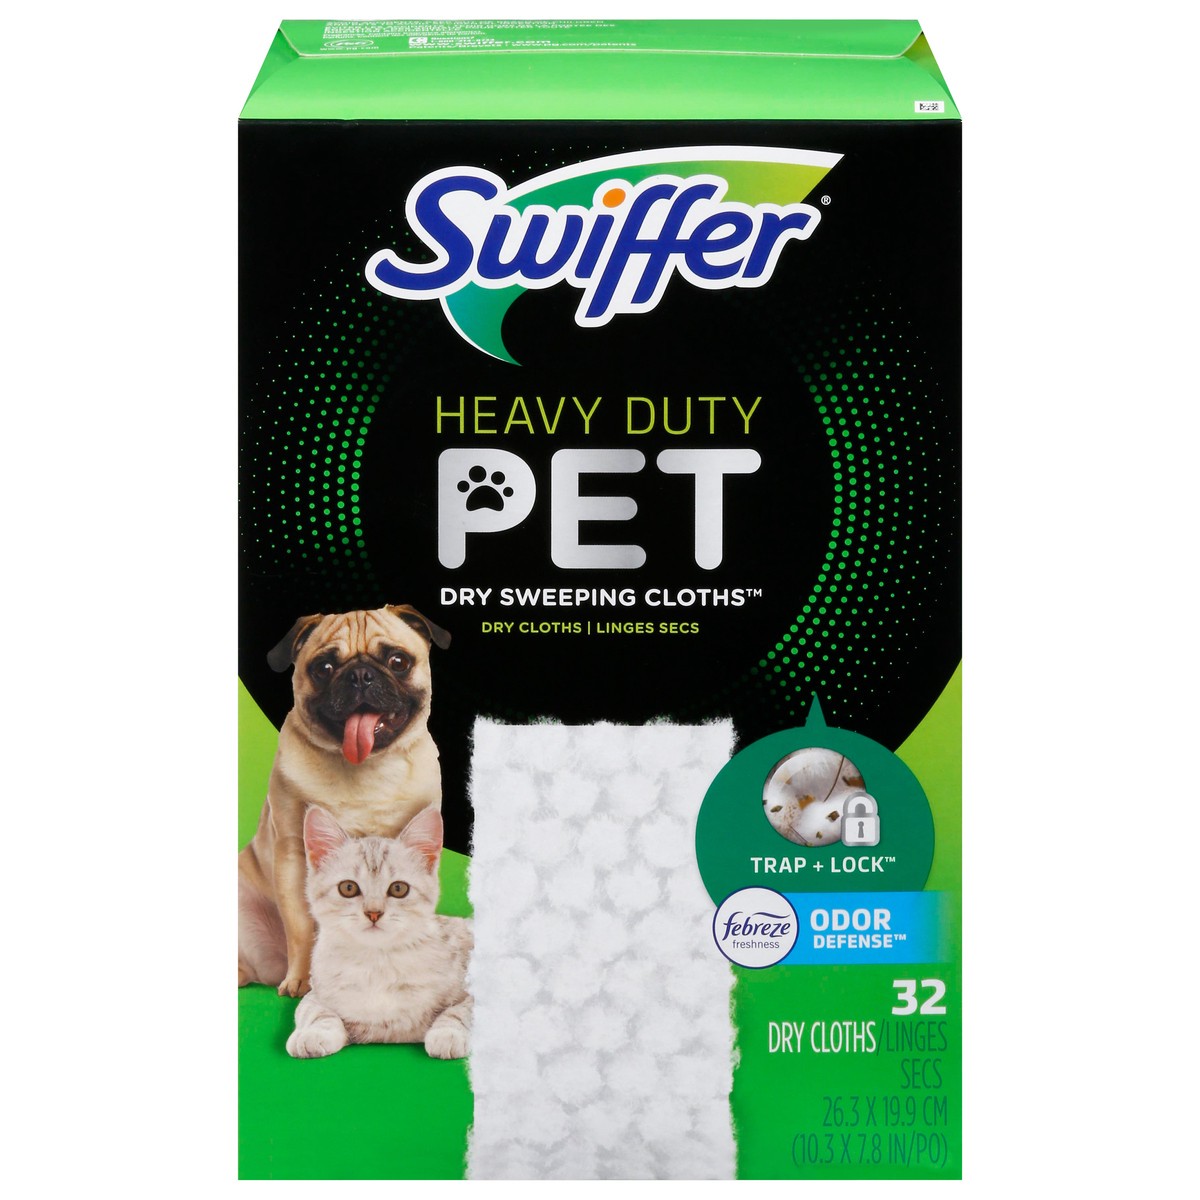 slide 1 of 9, Swiffer Sweeper Pet Heavy Duty Multi-Surface Dry Cloth Refills for Floor Sweeping and Cleaning, 32 count, 32 ct